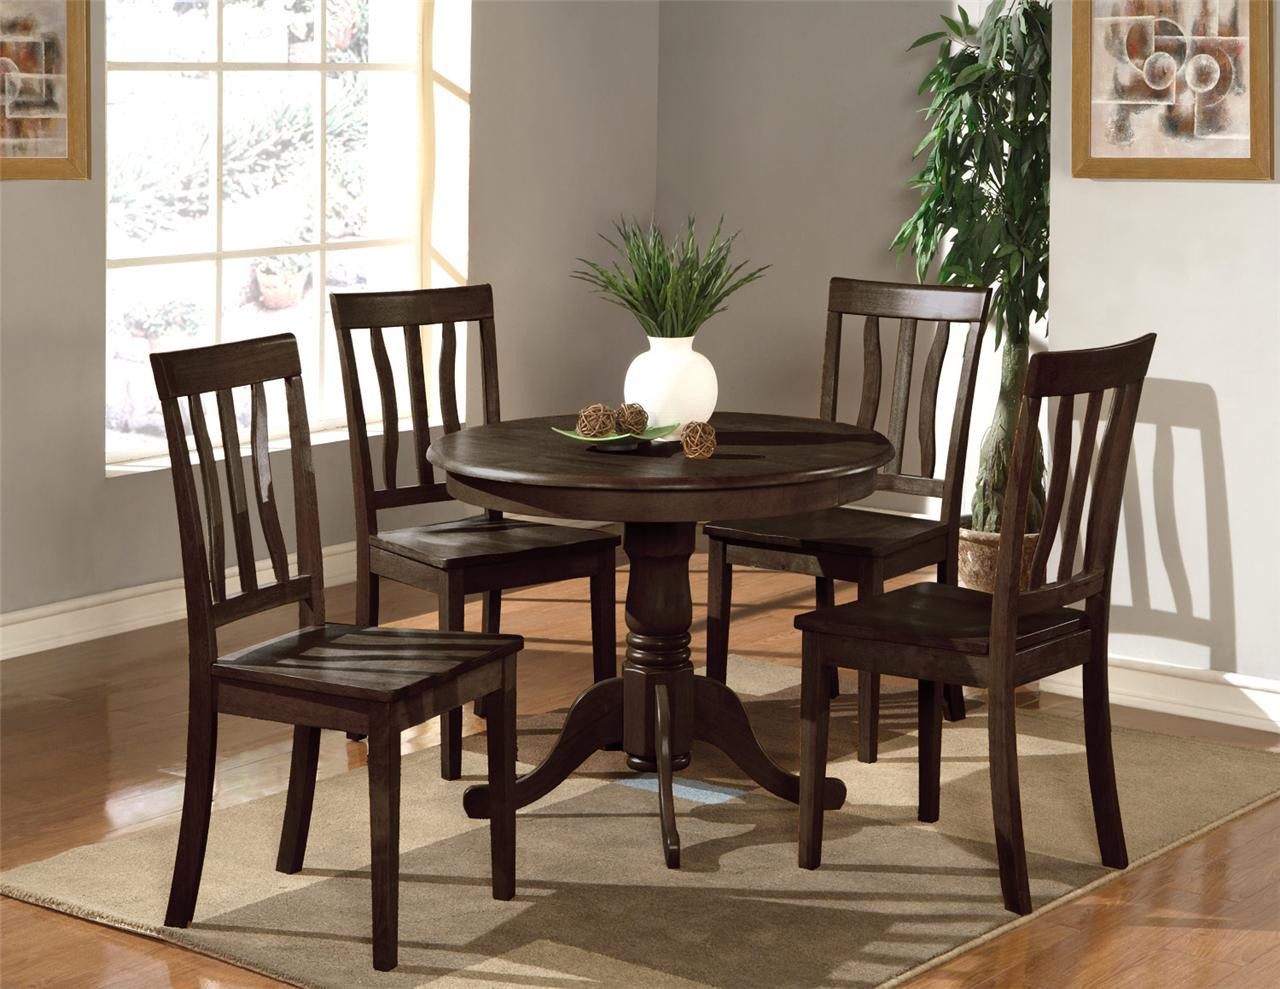 Small Round Kitchen Table Sets
 5 PC ROUND TABLE DINETTE KITCHEN TABLE & 4 WOOD OR PADDED